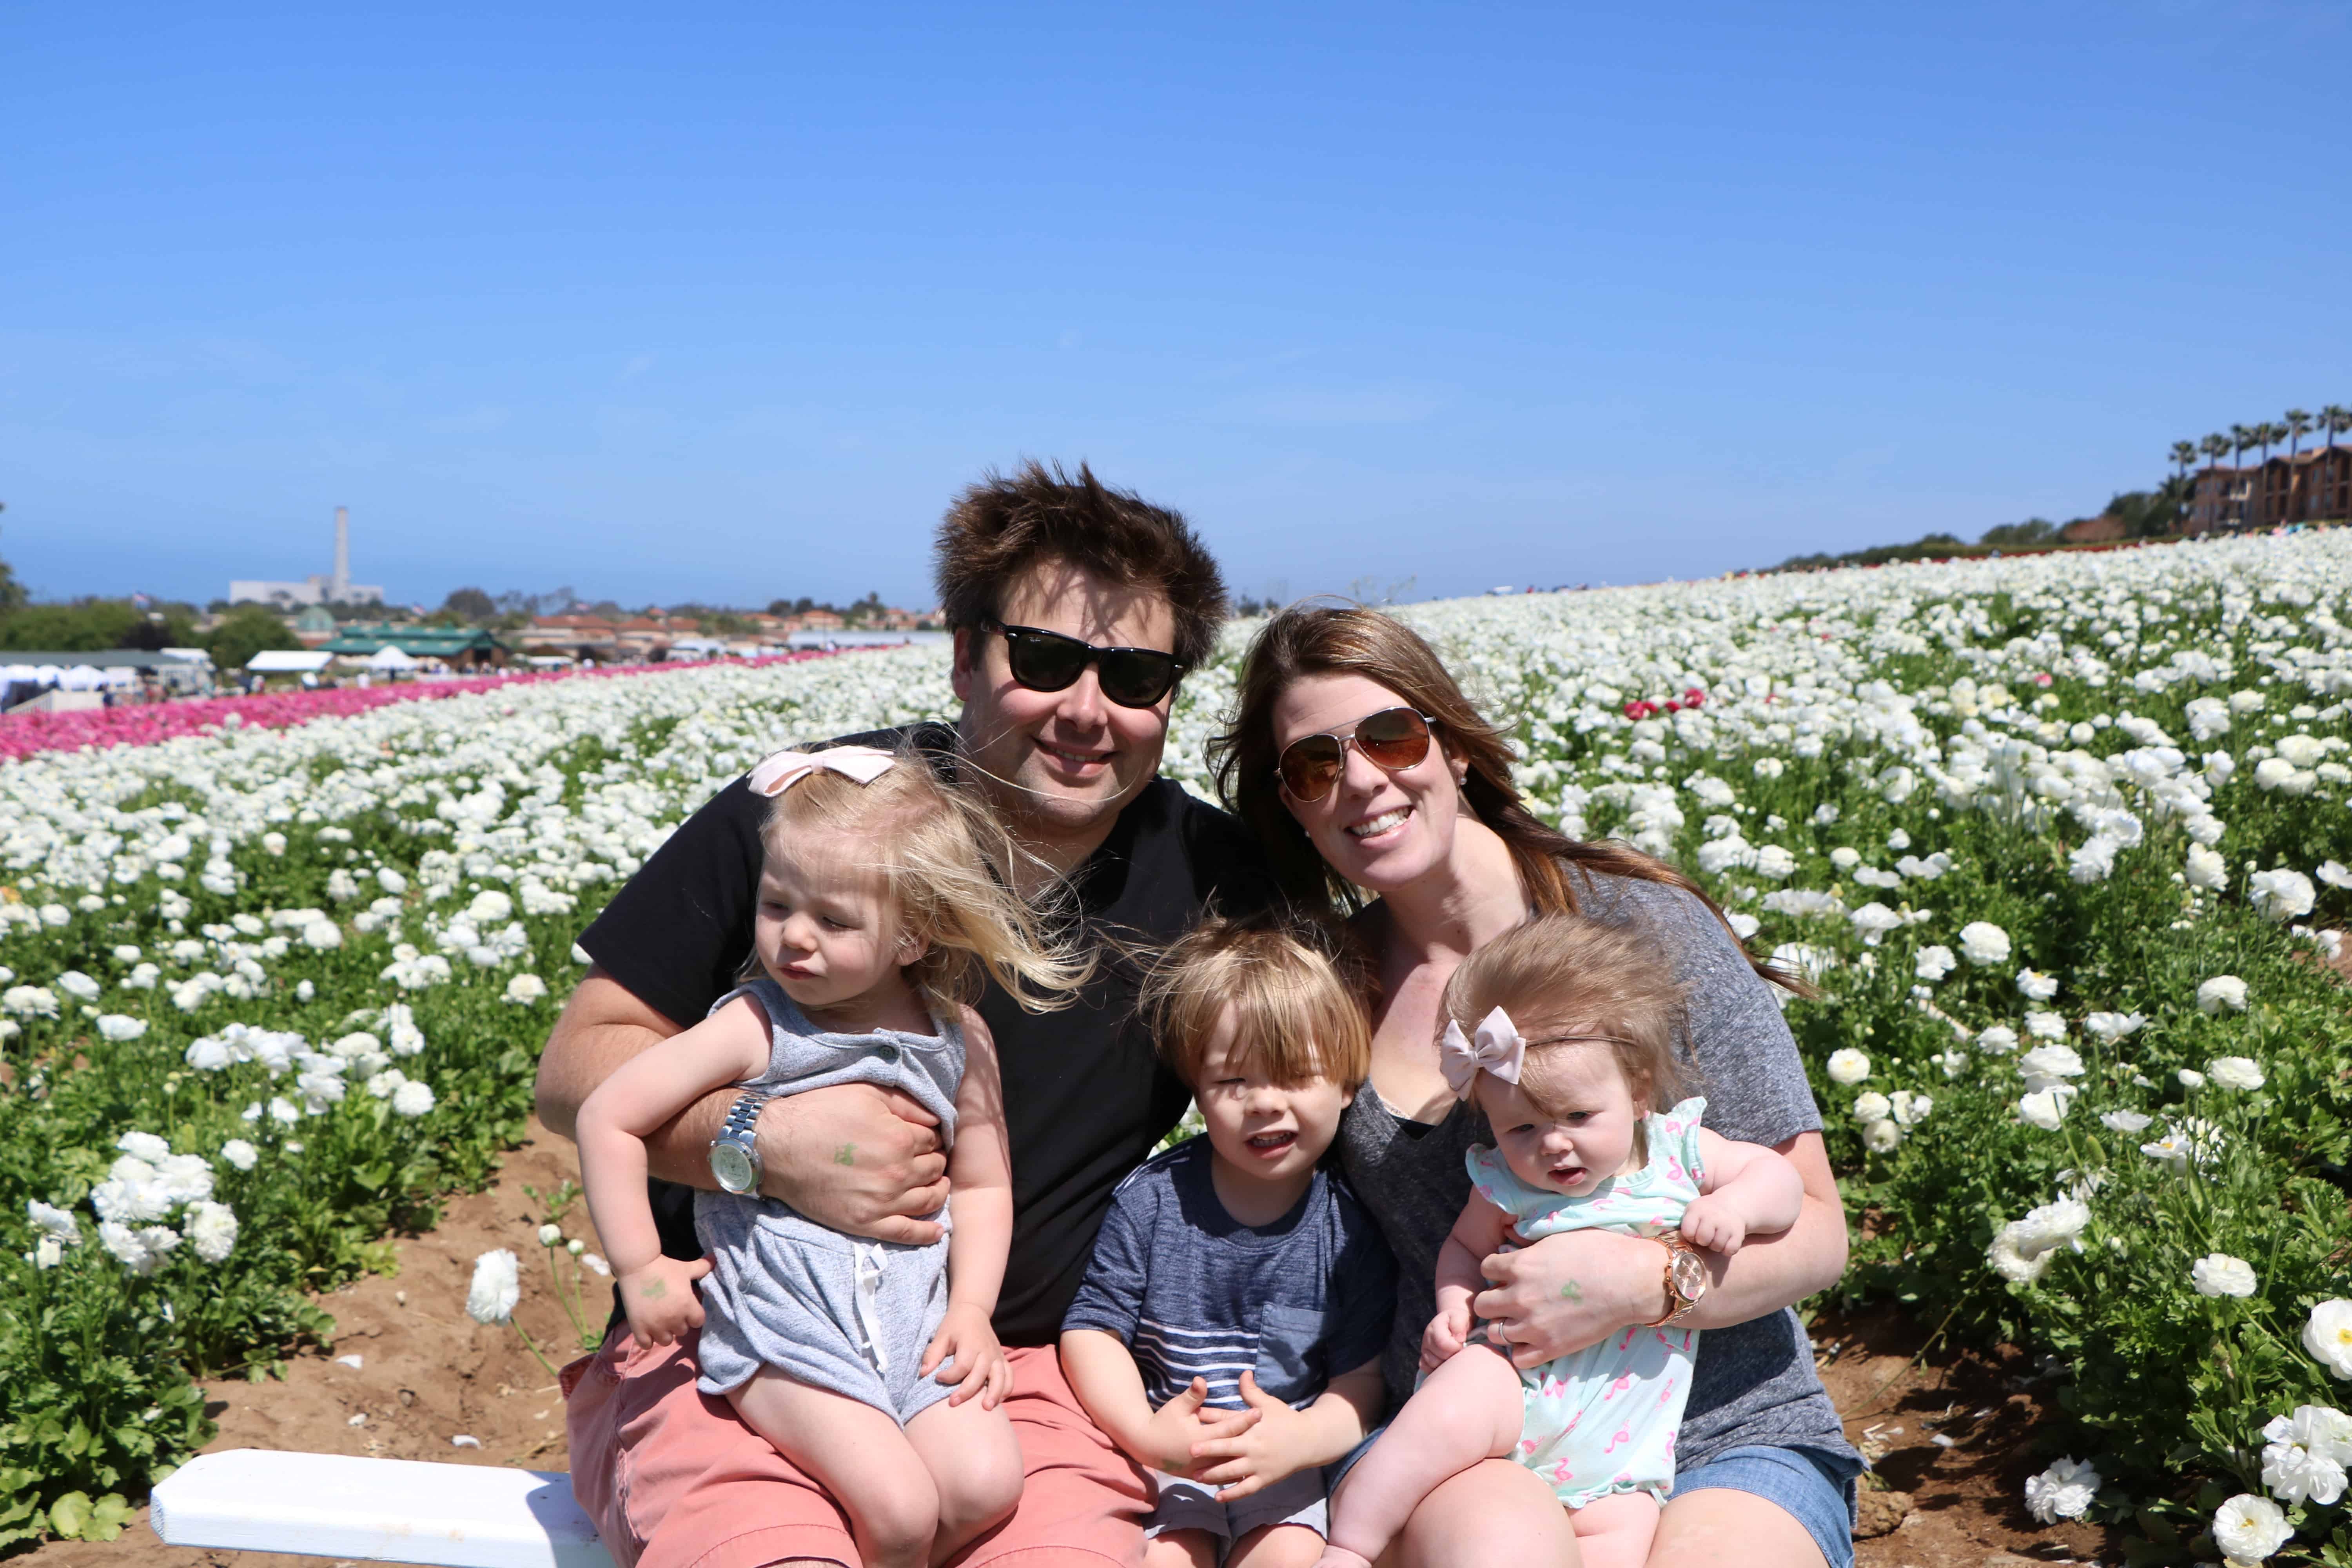 Carlsbad Flower Fields|Ahrens at Home